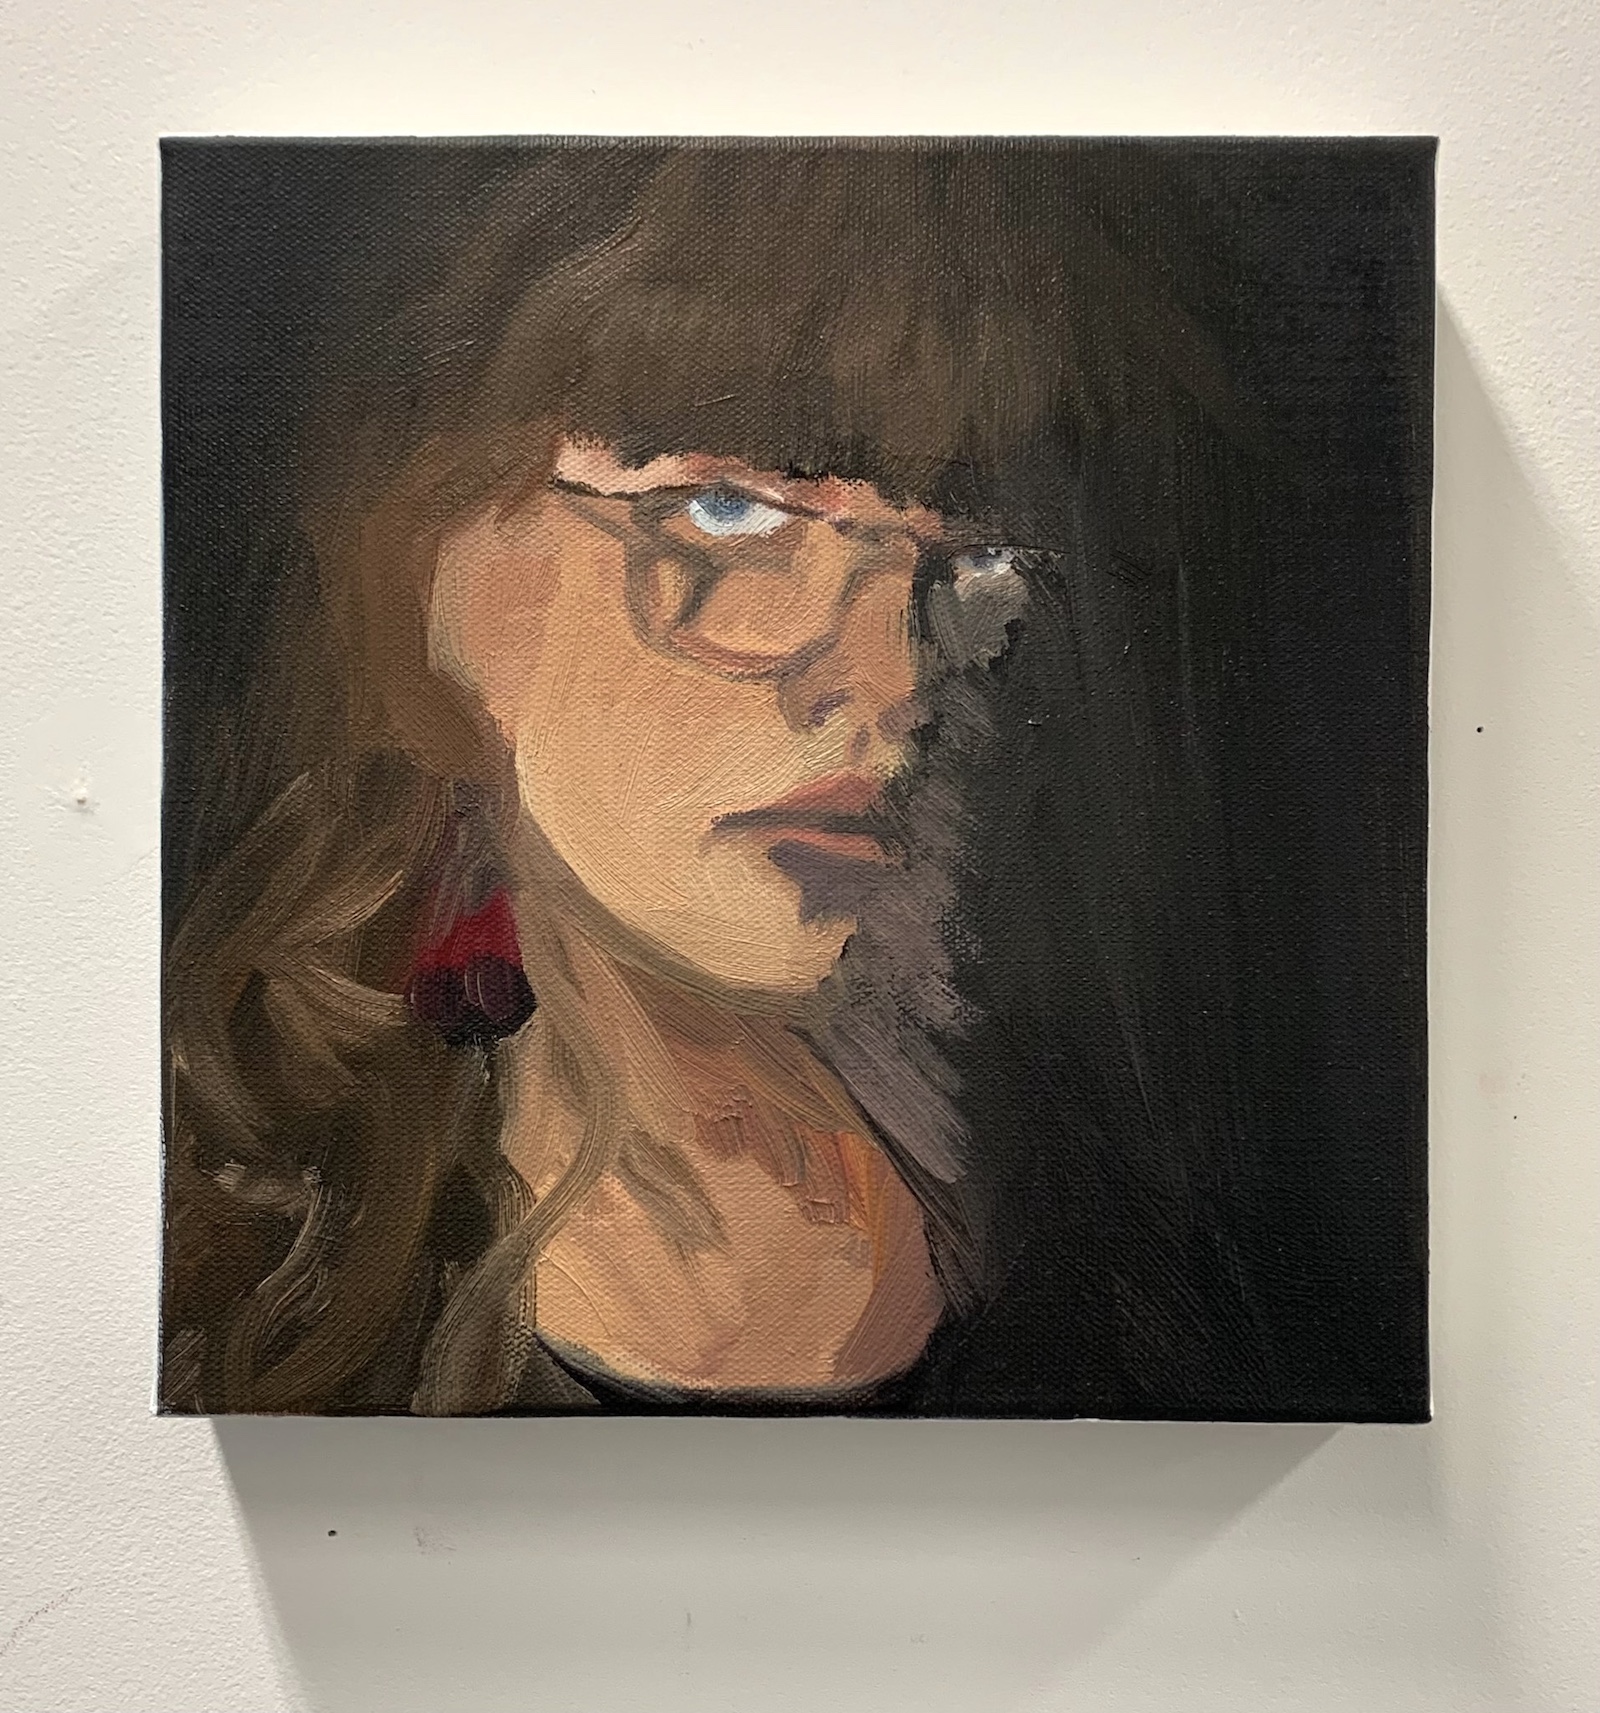 A portrait painting of a woman with glasses